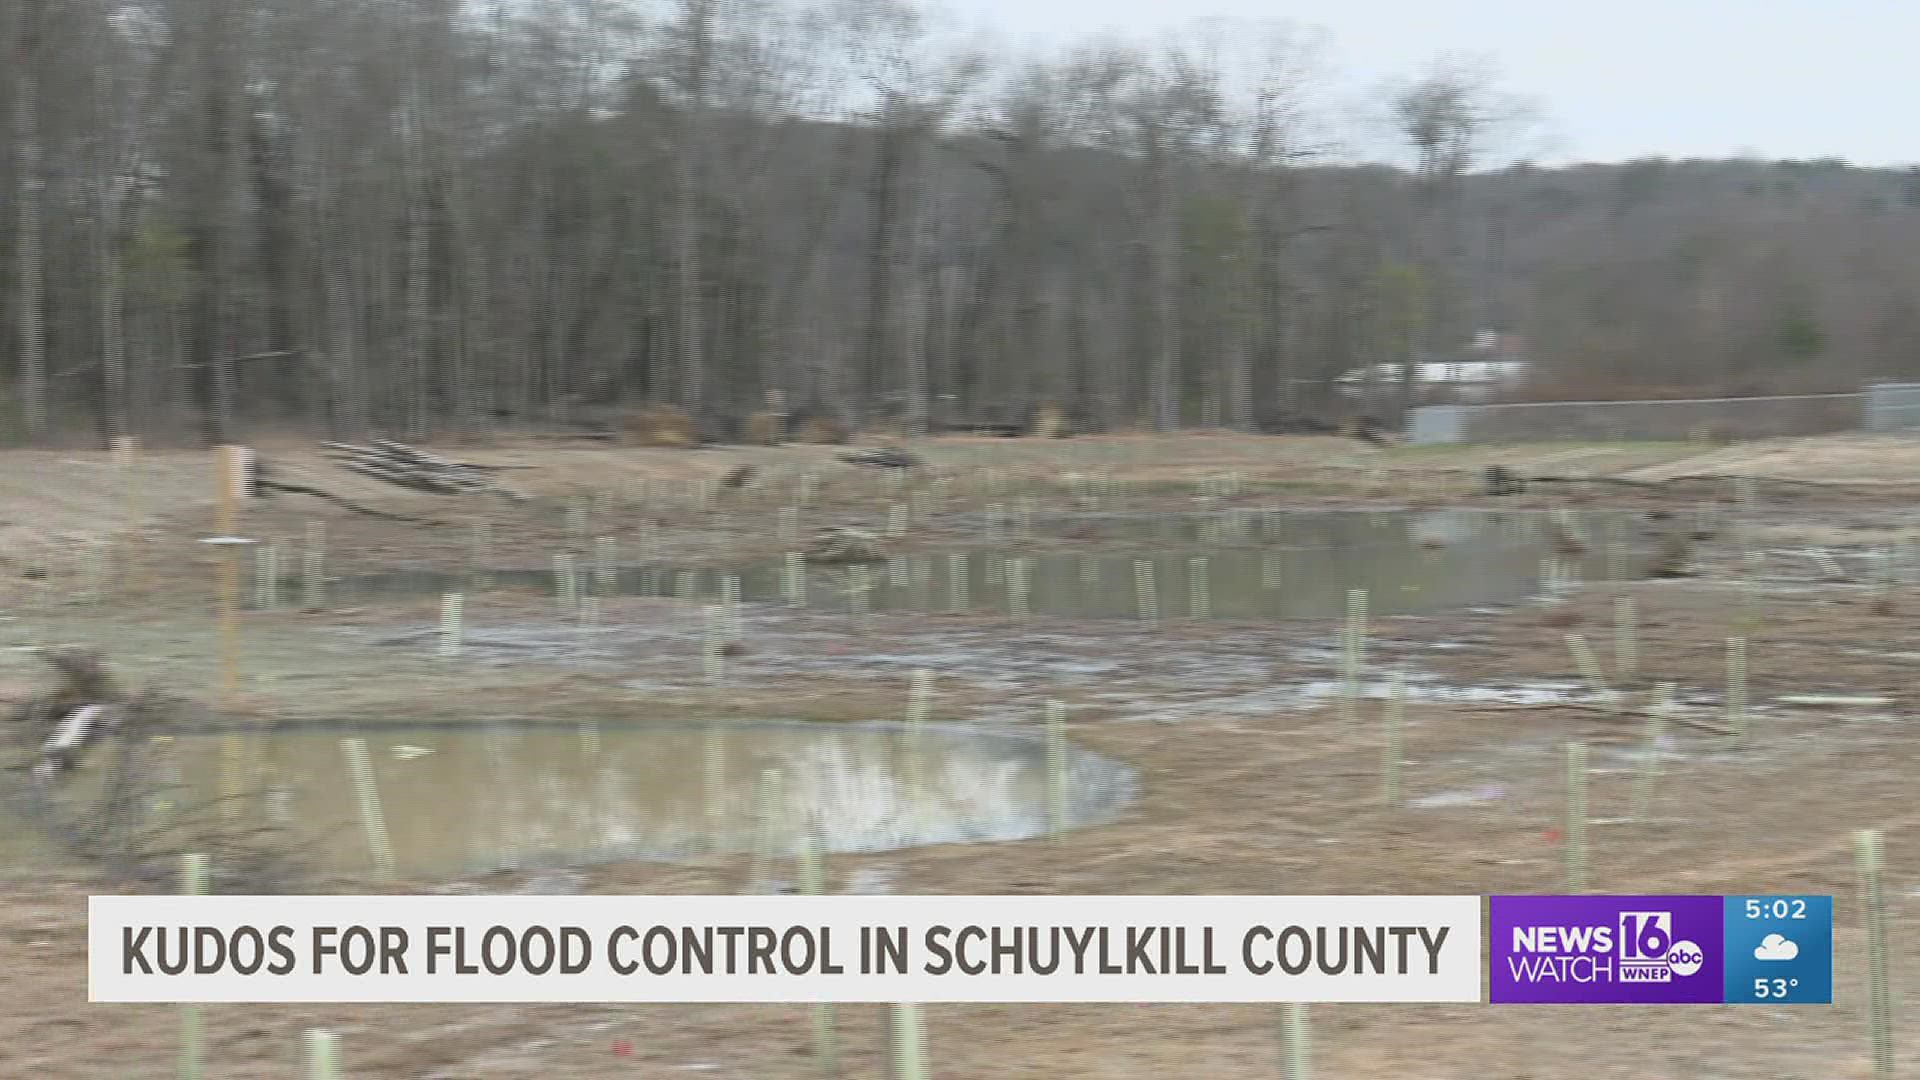 Schuylkill County is being recognized for its recent project and successfully mitigating possible flood issues.